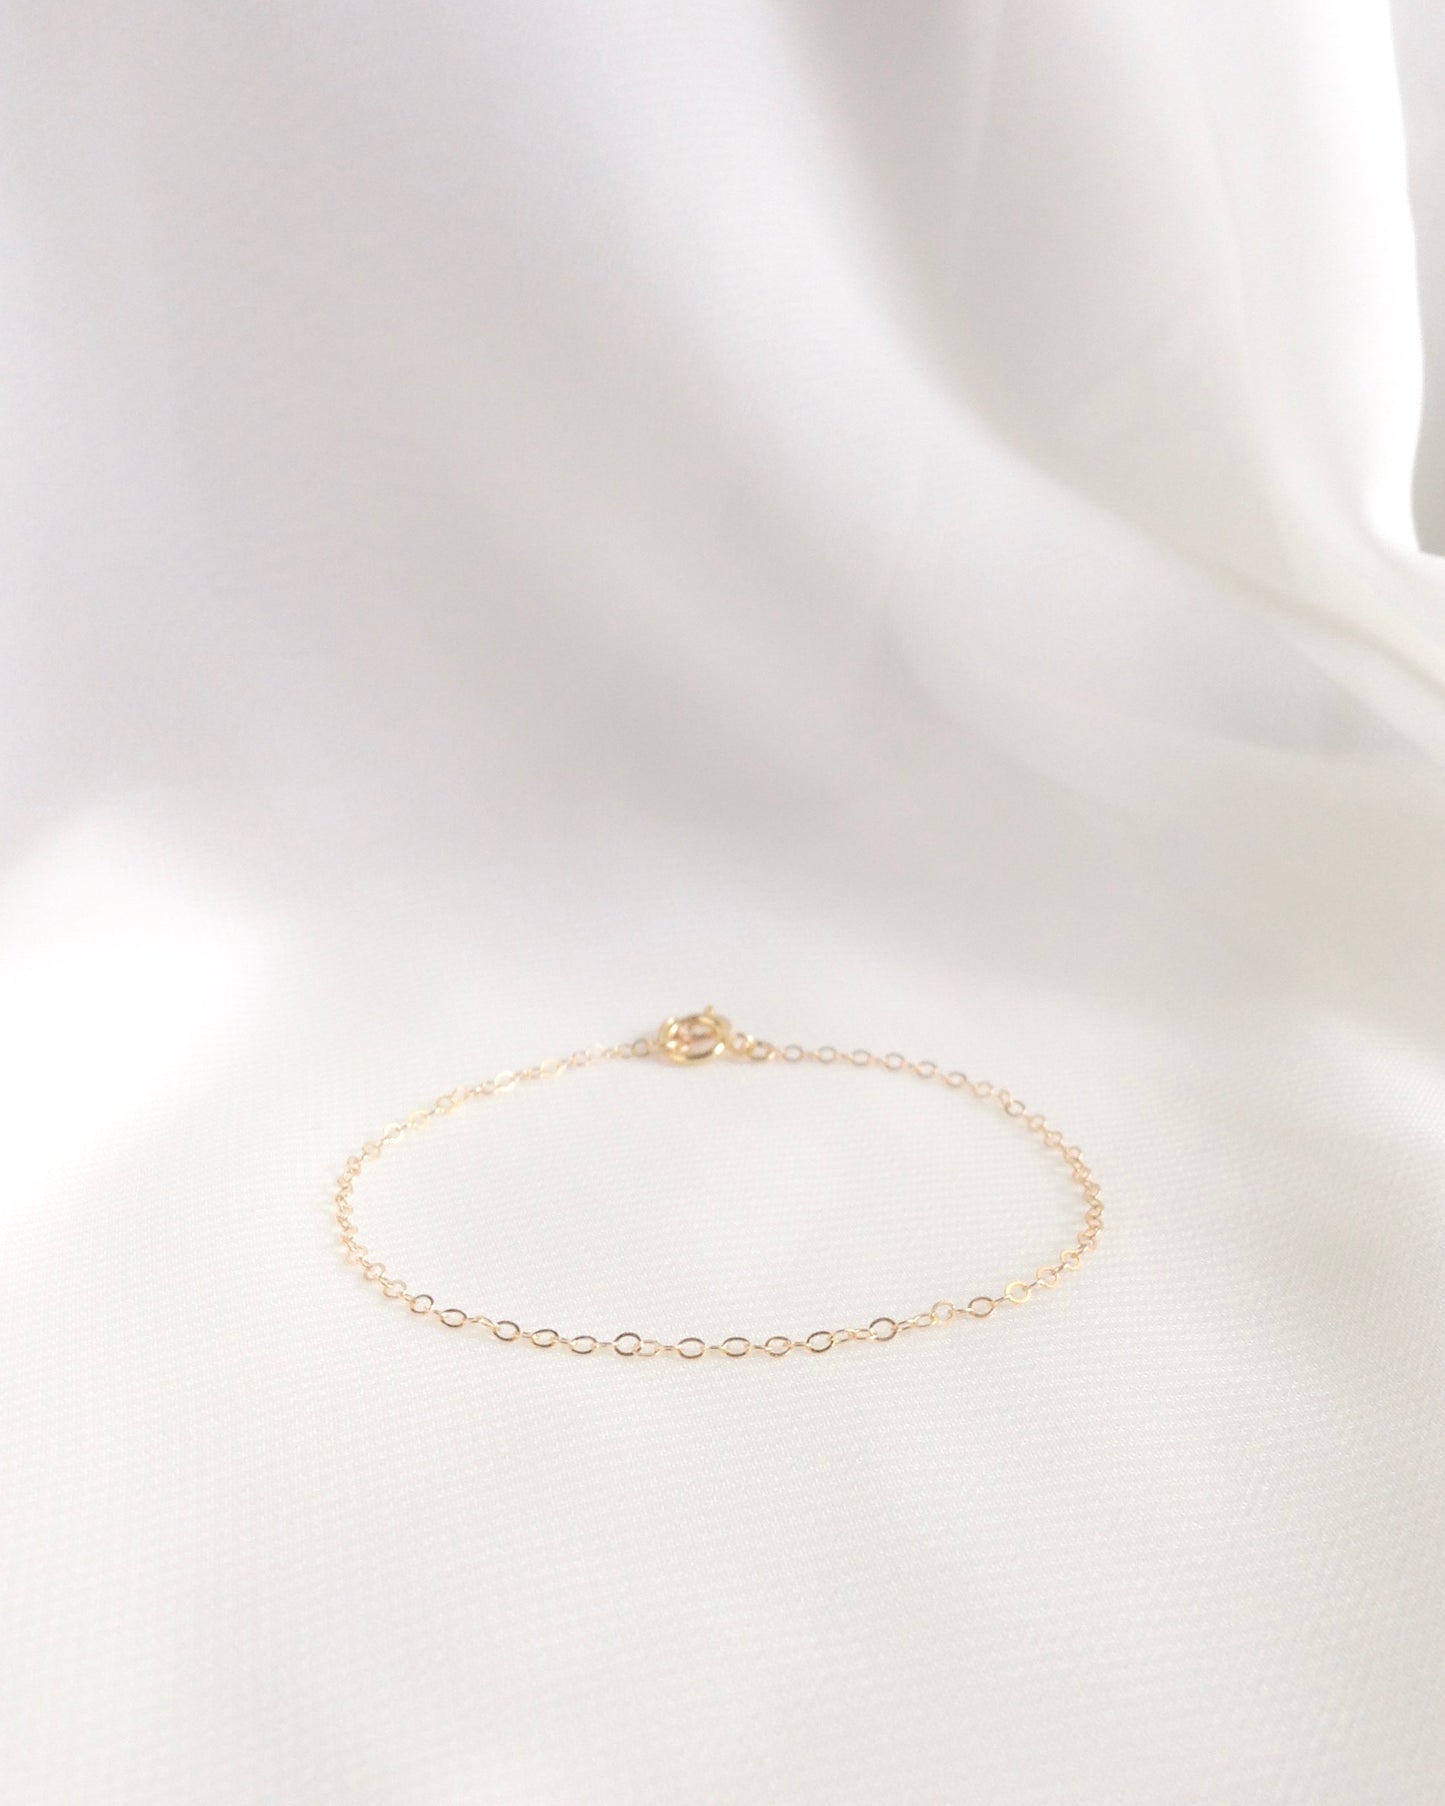 Minimalist Everyday Bracelet in Gold Filled or Sterling Silver | IB Jewelry